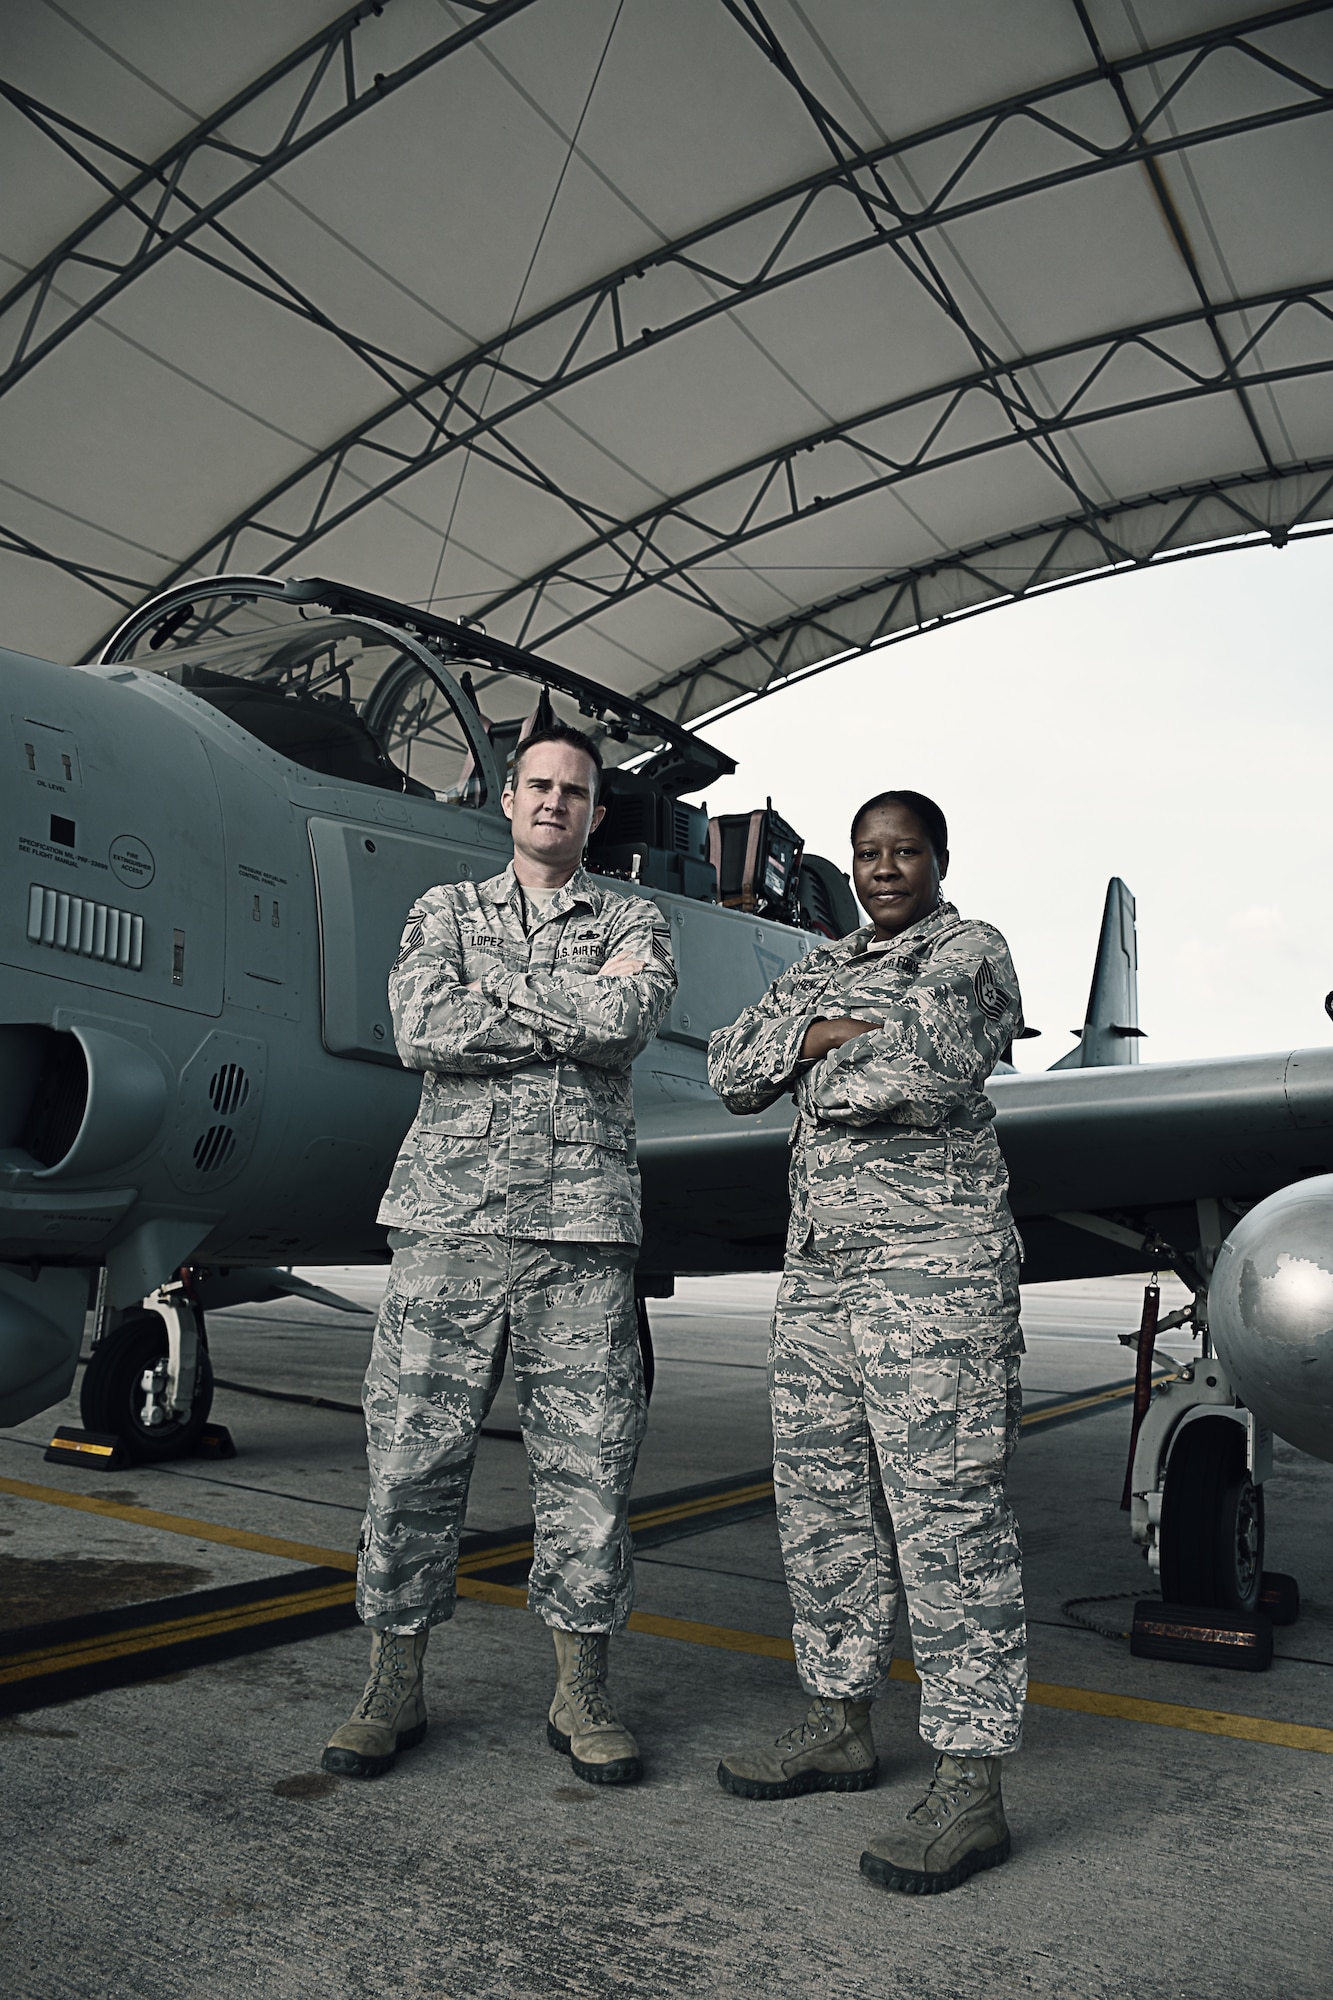 Senior Master Sgt. Scott Lopez, the maintenance superintendent for the 476th Maintenance Squadron at Moody Air Force Base, Ga., and Tech. Sgt. Lauren Camarena, an electrical and environmental systems craftsman with the 476 MXS, pose with an A-29 Super Tucano October 25, 2018, at Moody AFB.